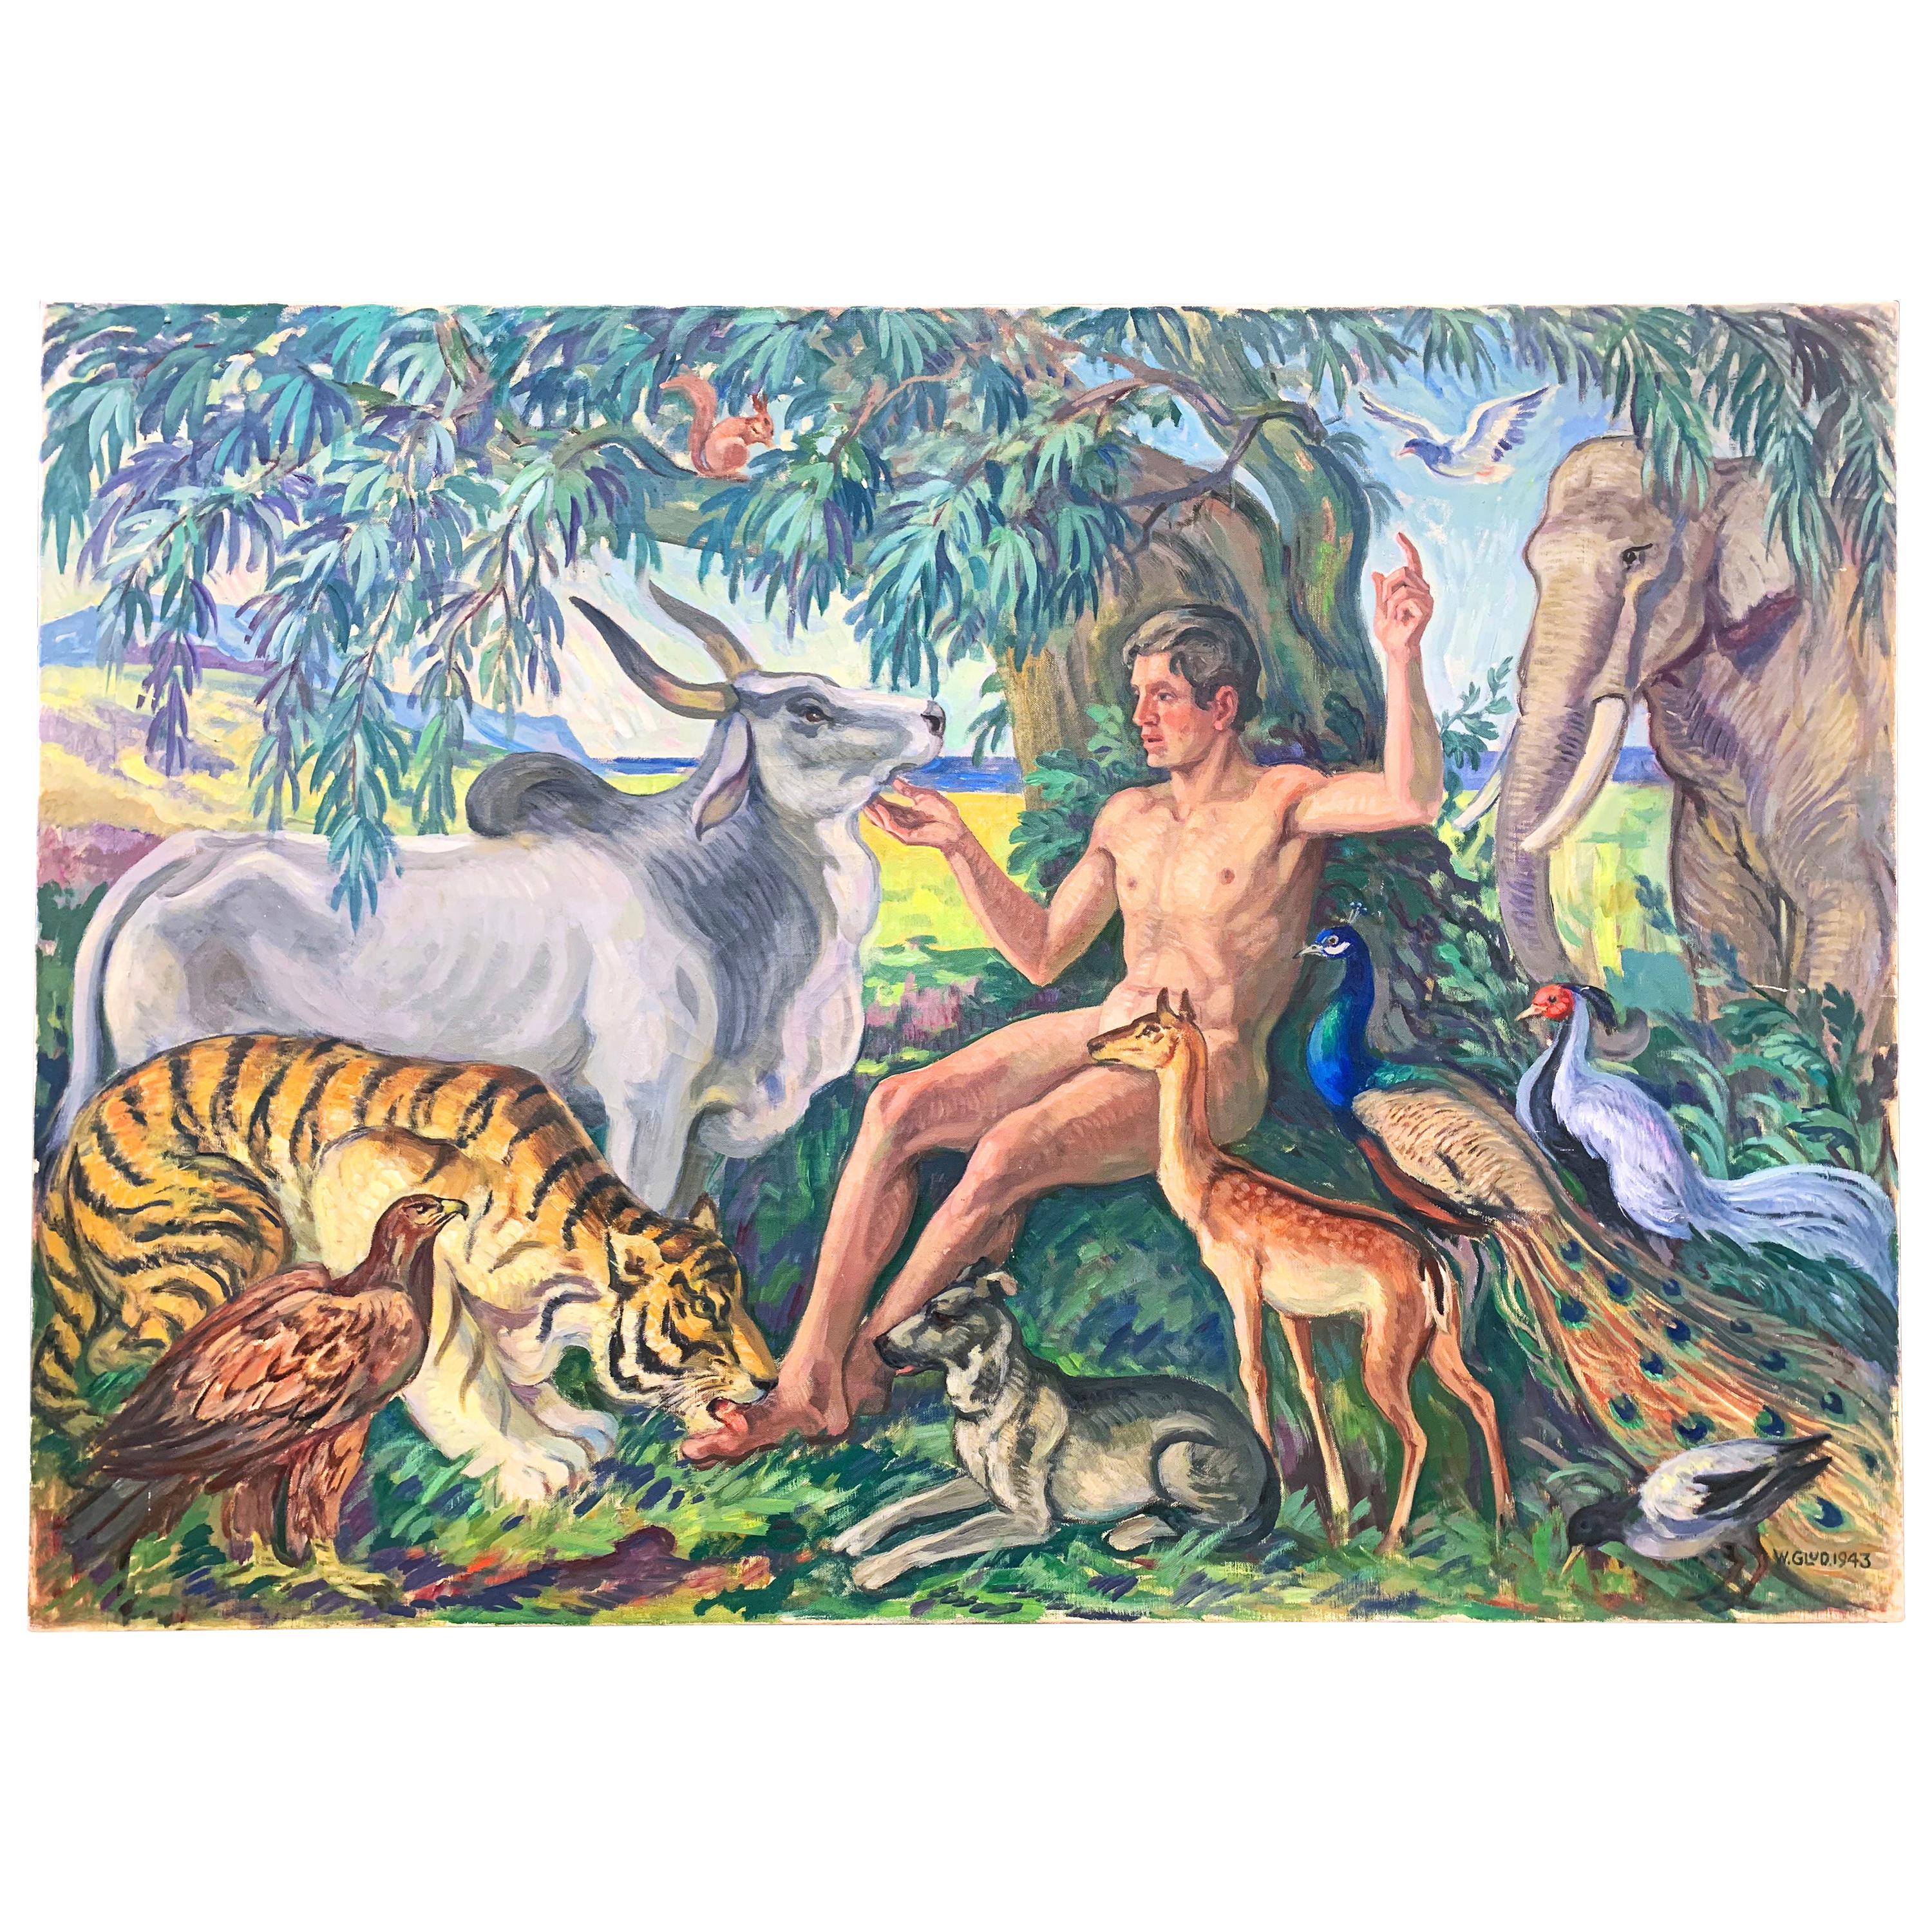 "Adam in Eden, " Monumental Depiction of Paradise in Wartime